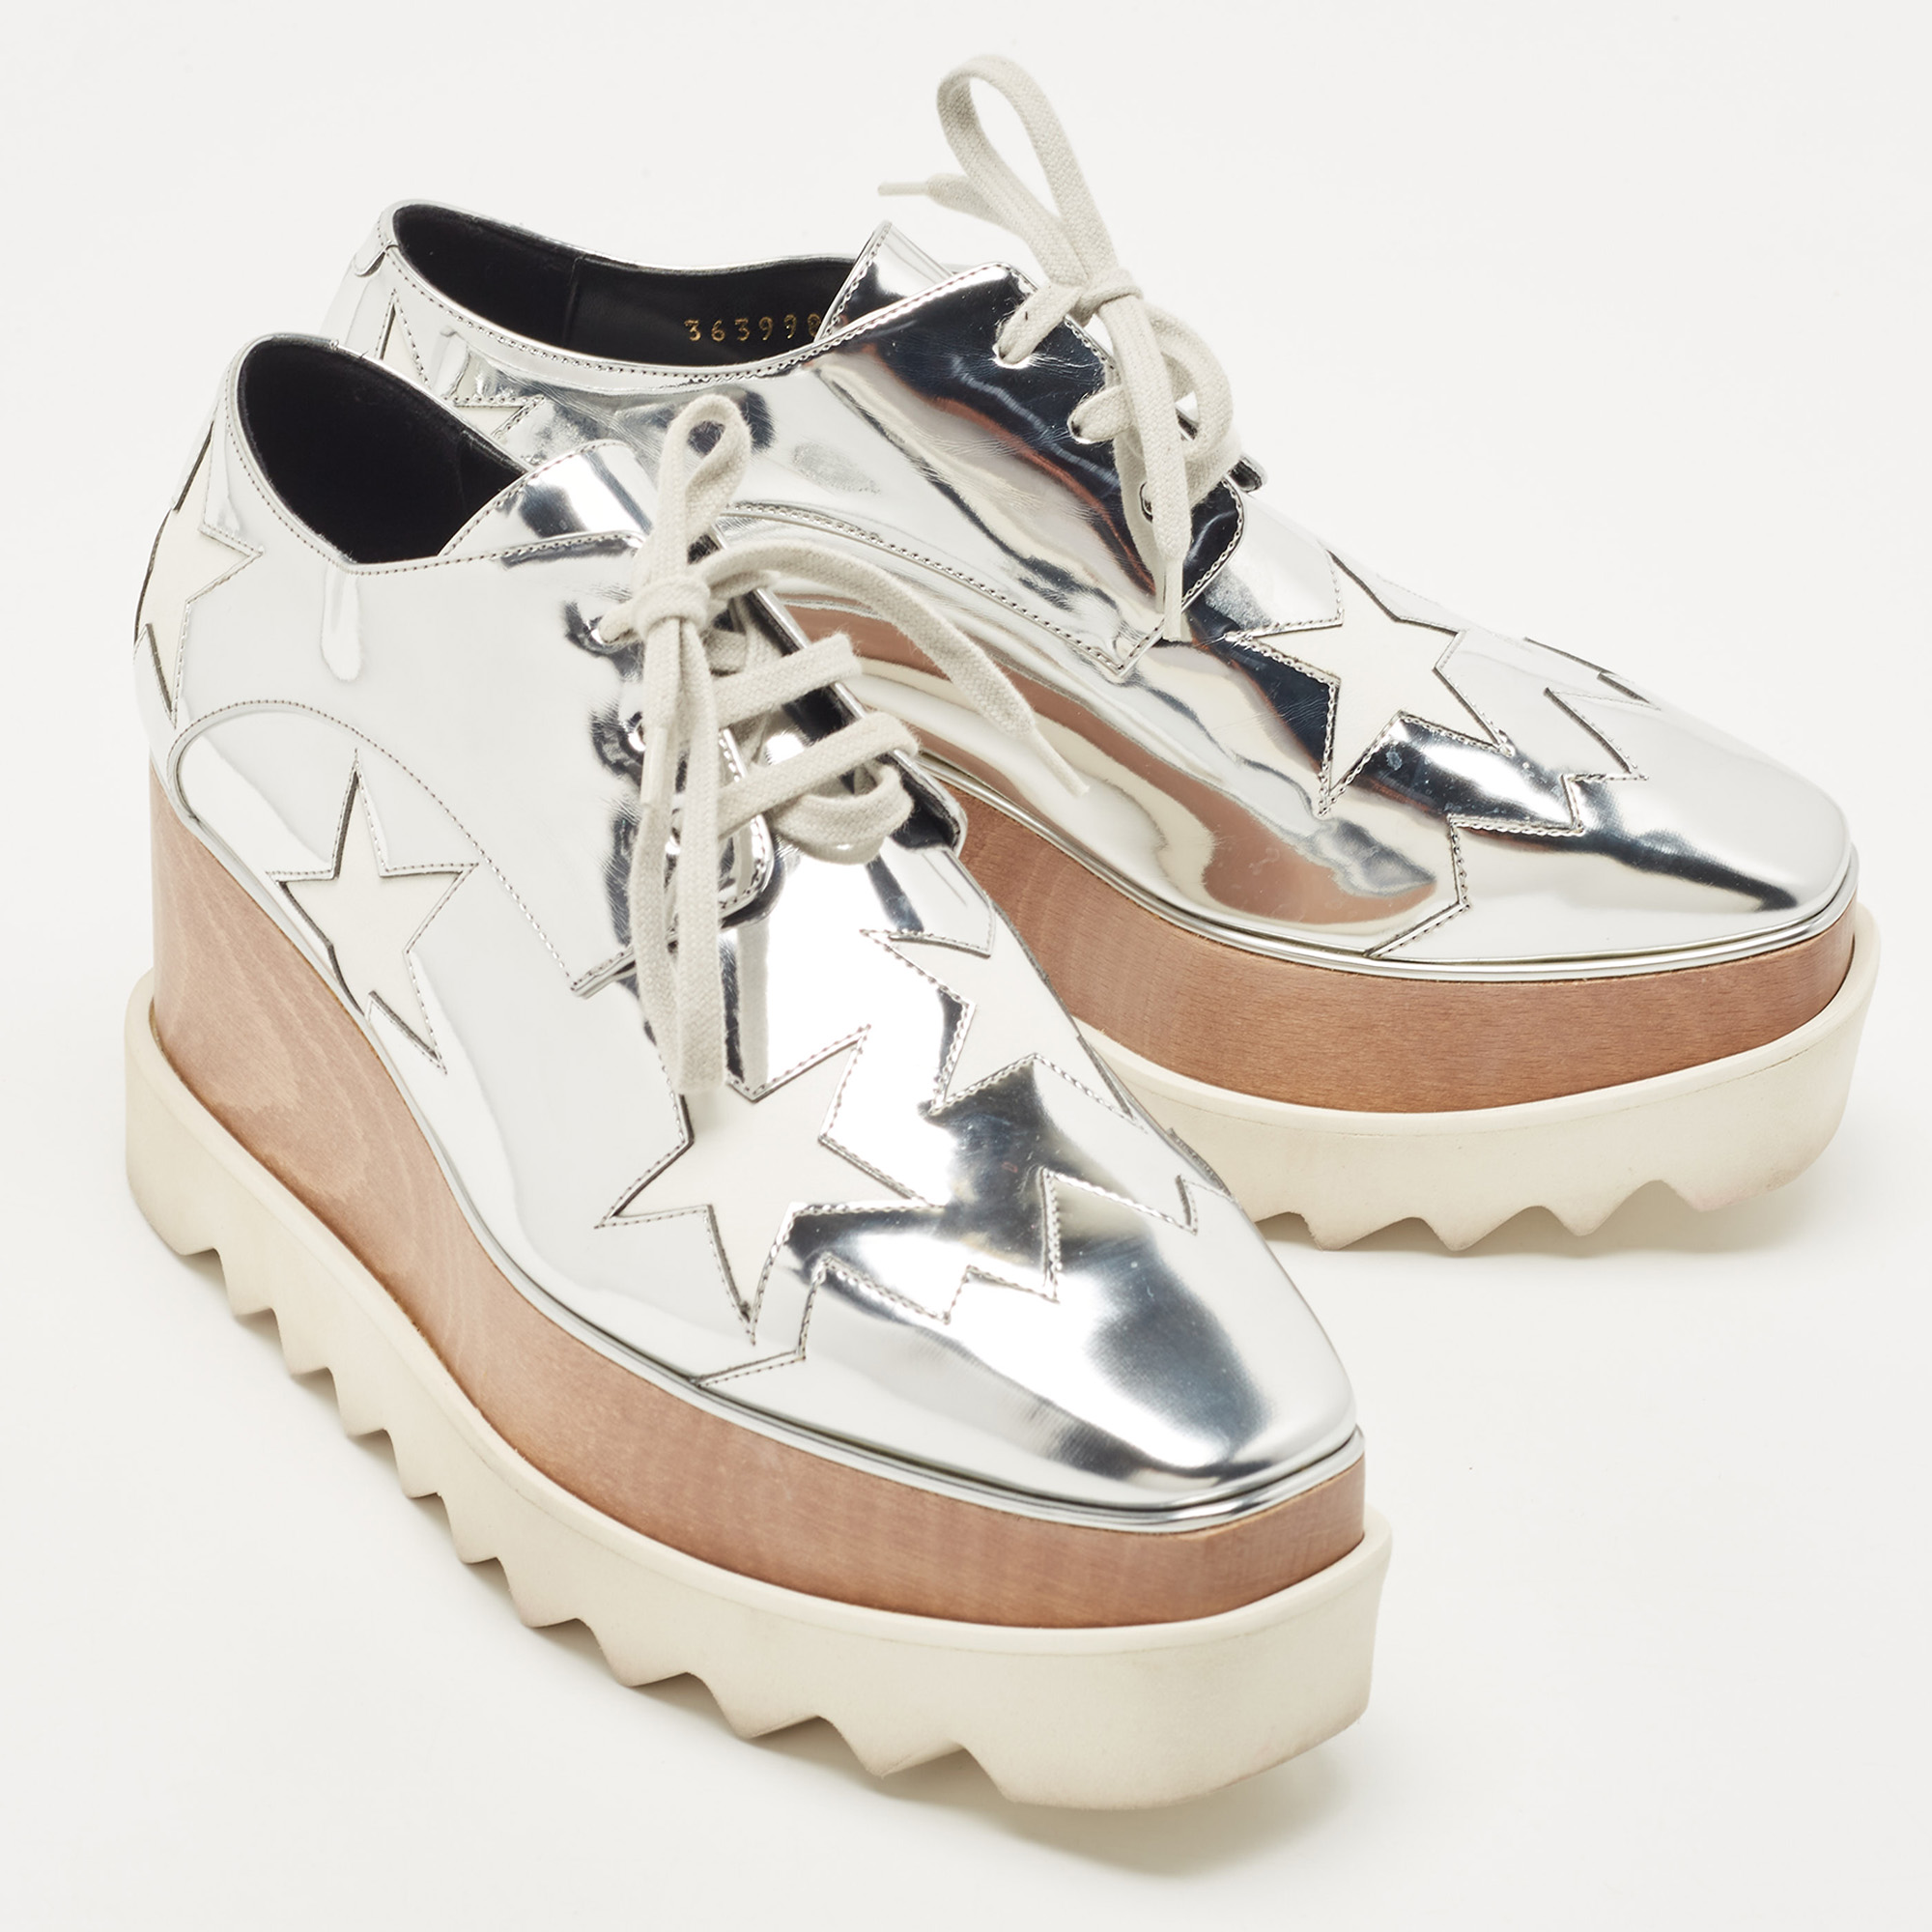 Stella McCartney Silver Faux Leather Elyse Star Wedge Sneakers Size 38